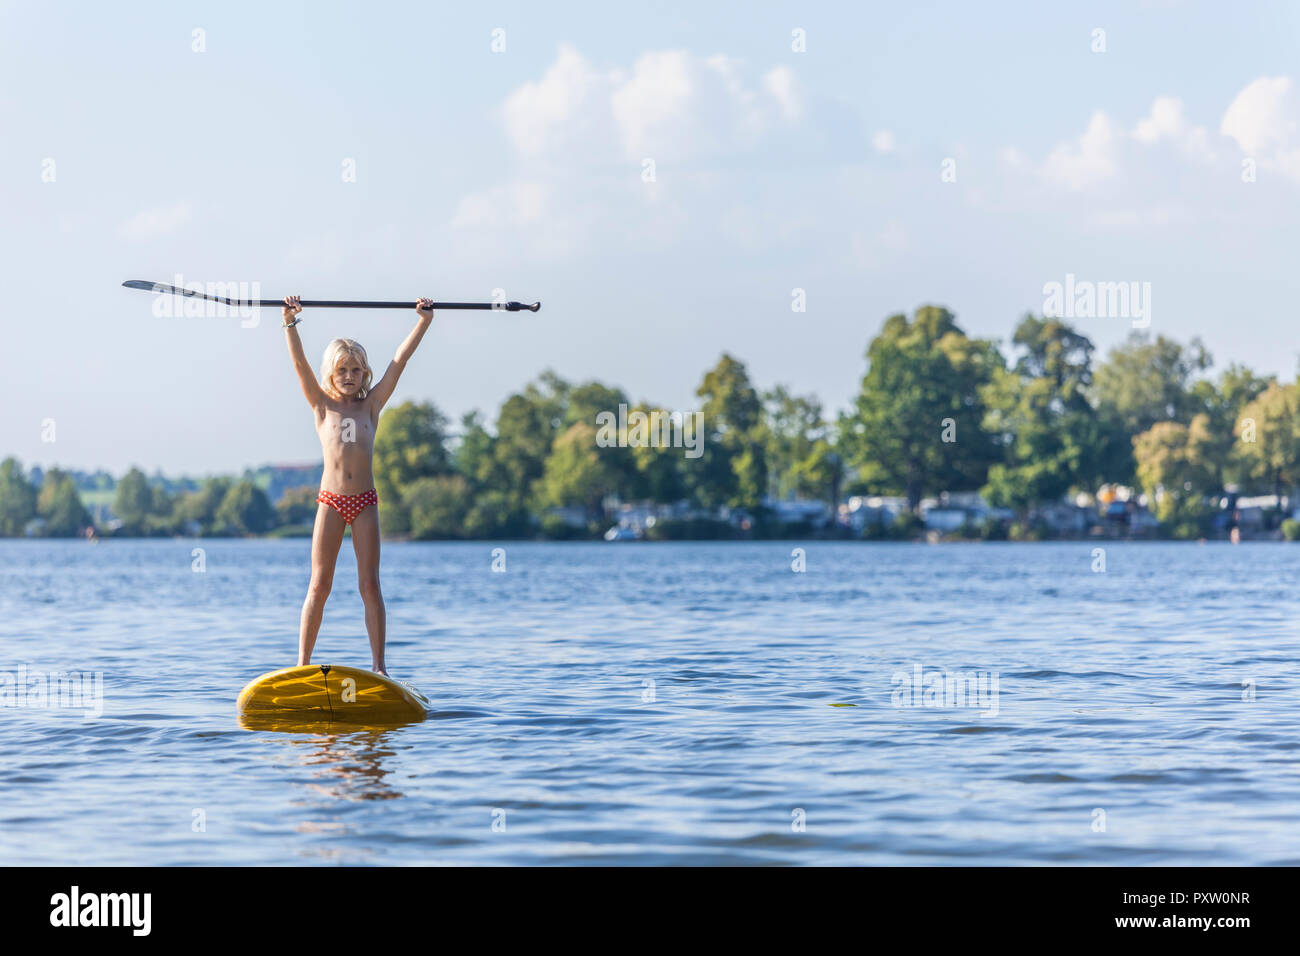 Junge Mädchen Stand Up Paddle Surfing Stockfoto